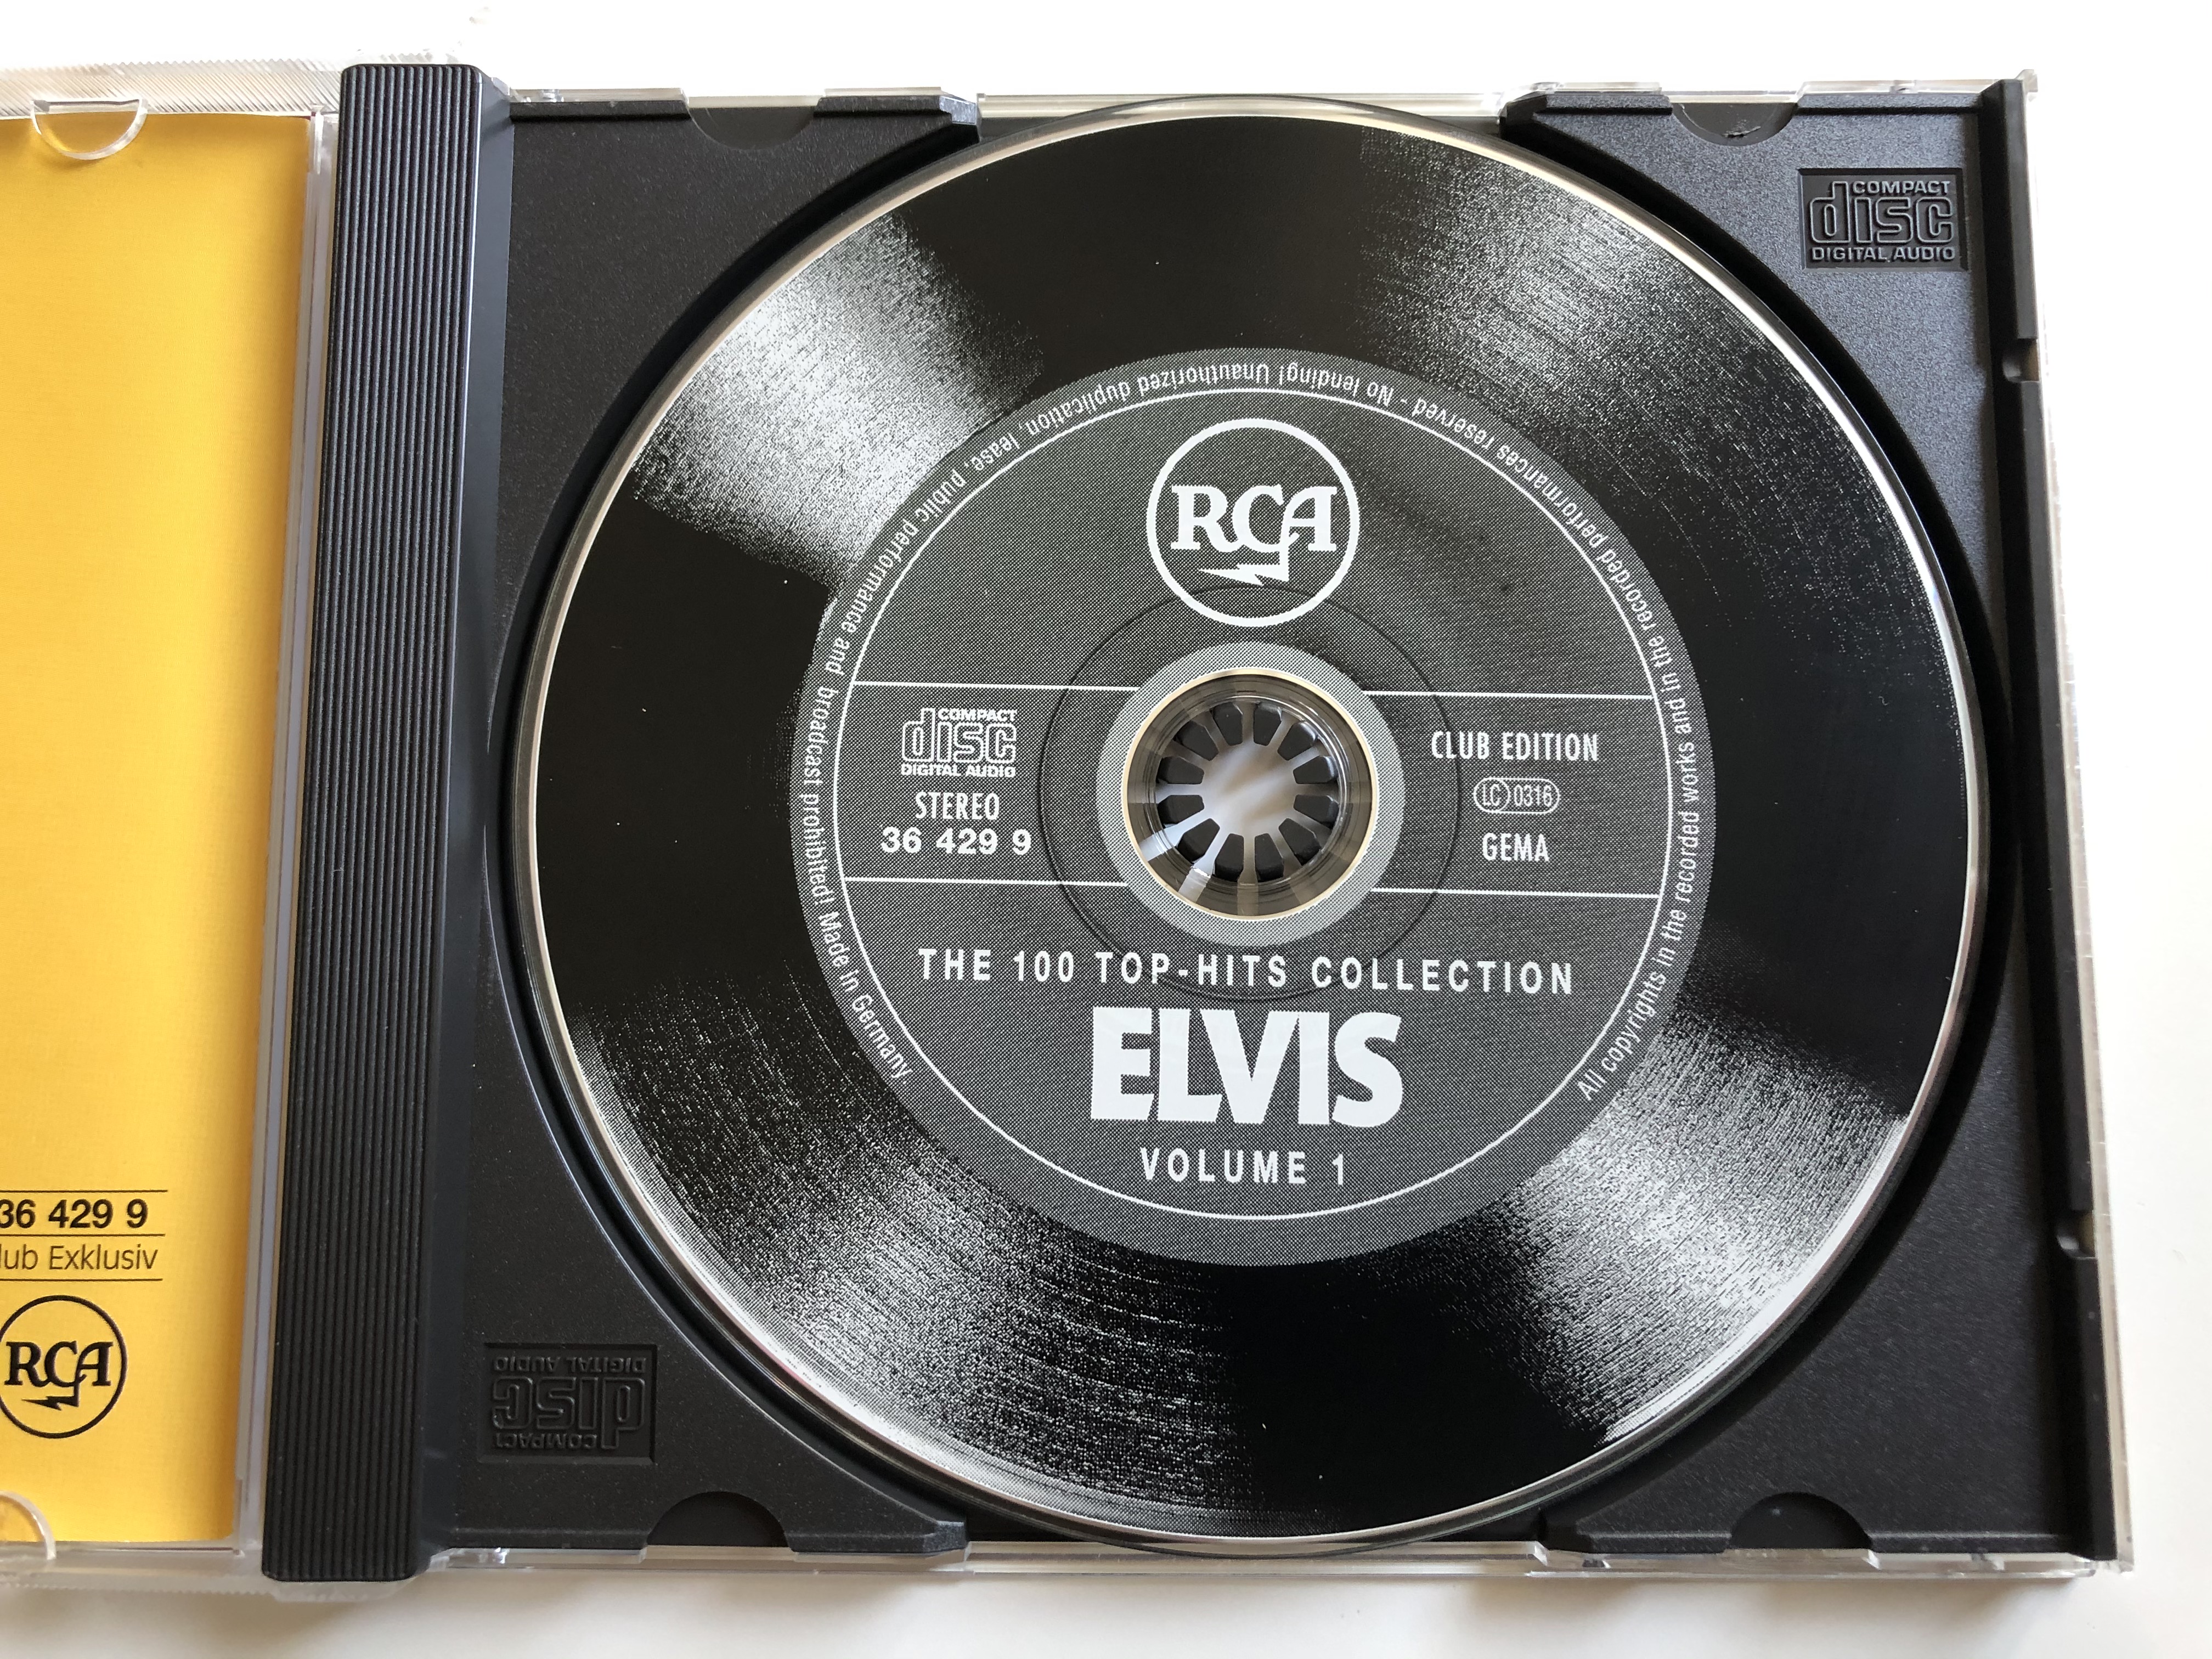 elvis-the-100-top-hits-collection-rca-5x-audio-cd-box-set-1997-stereo-36-428-1-7-.jpg